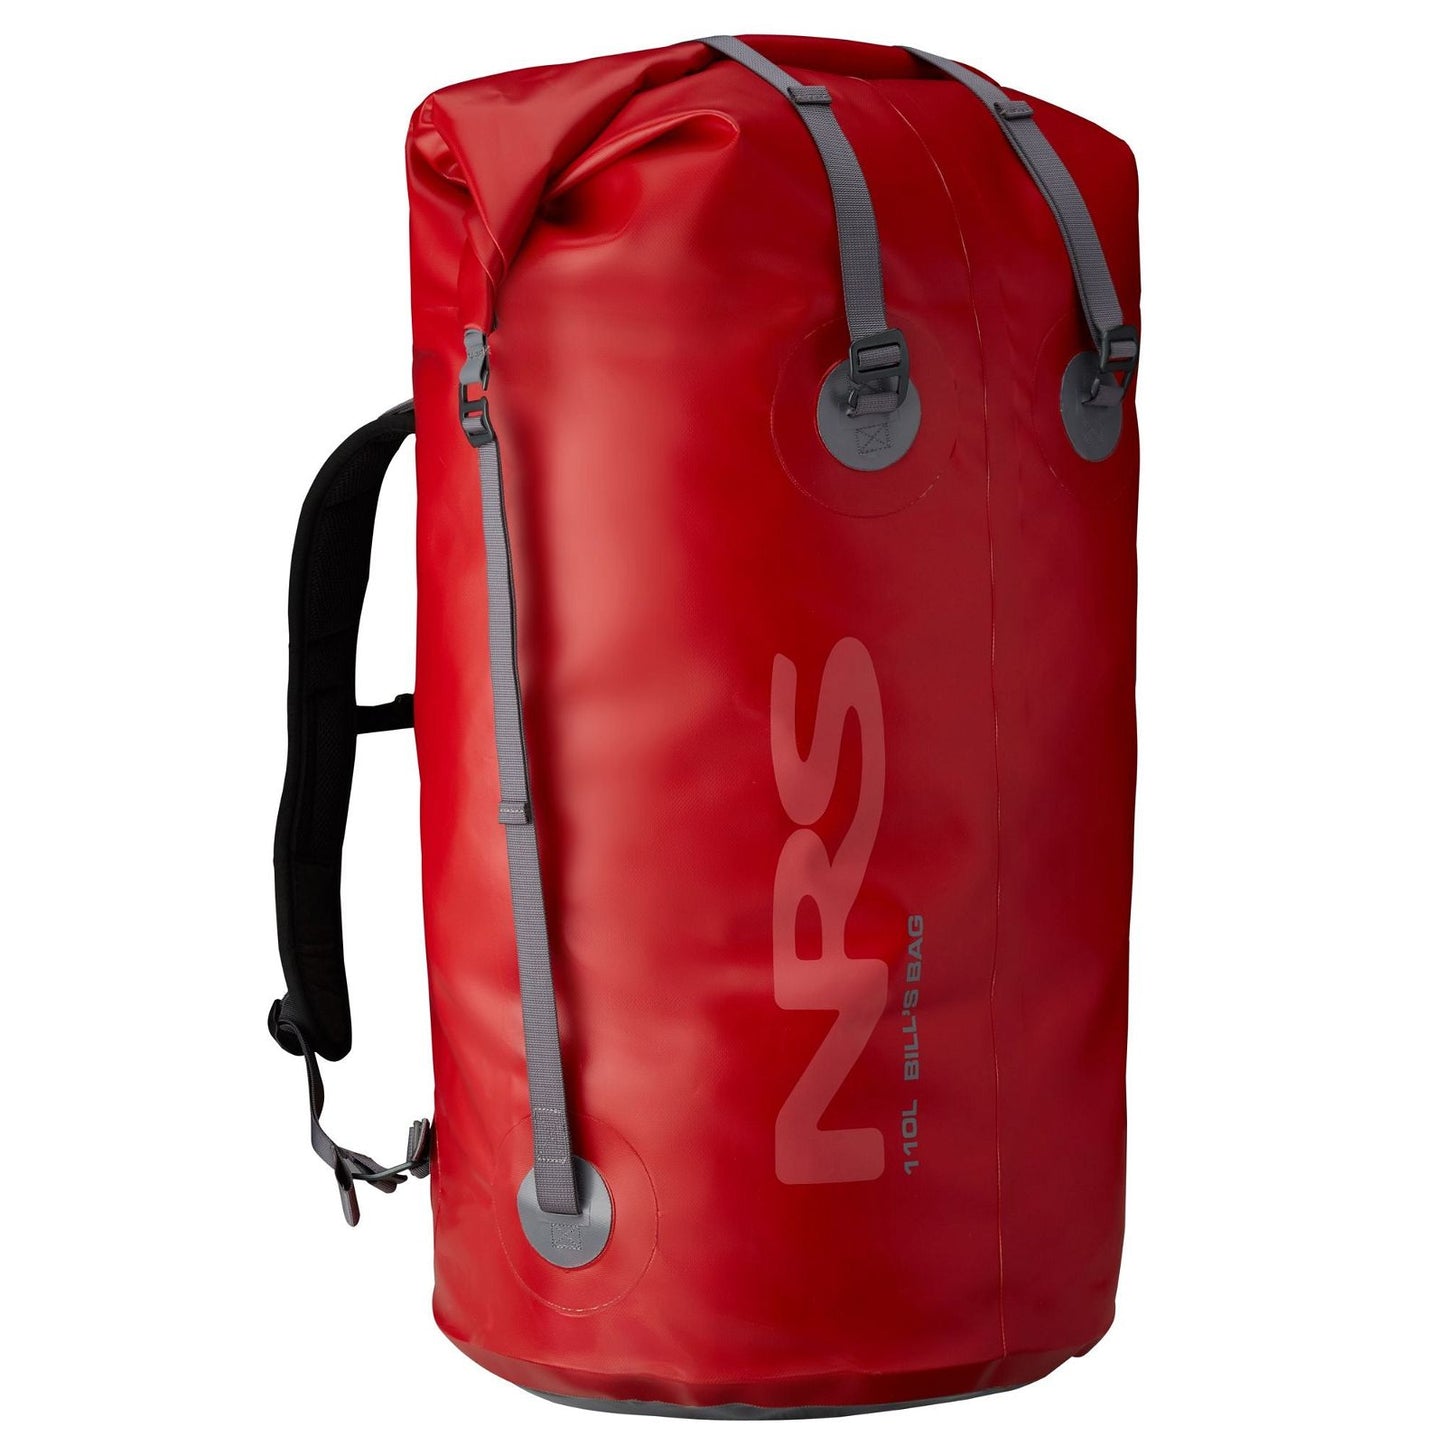 NRS  NRS Bill's Bag 110L Dry Bag  BestCoast Outfitters 